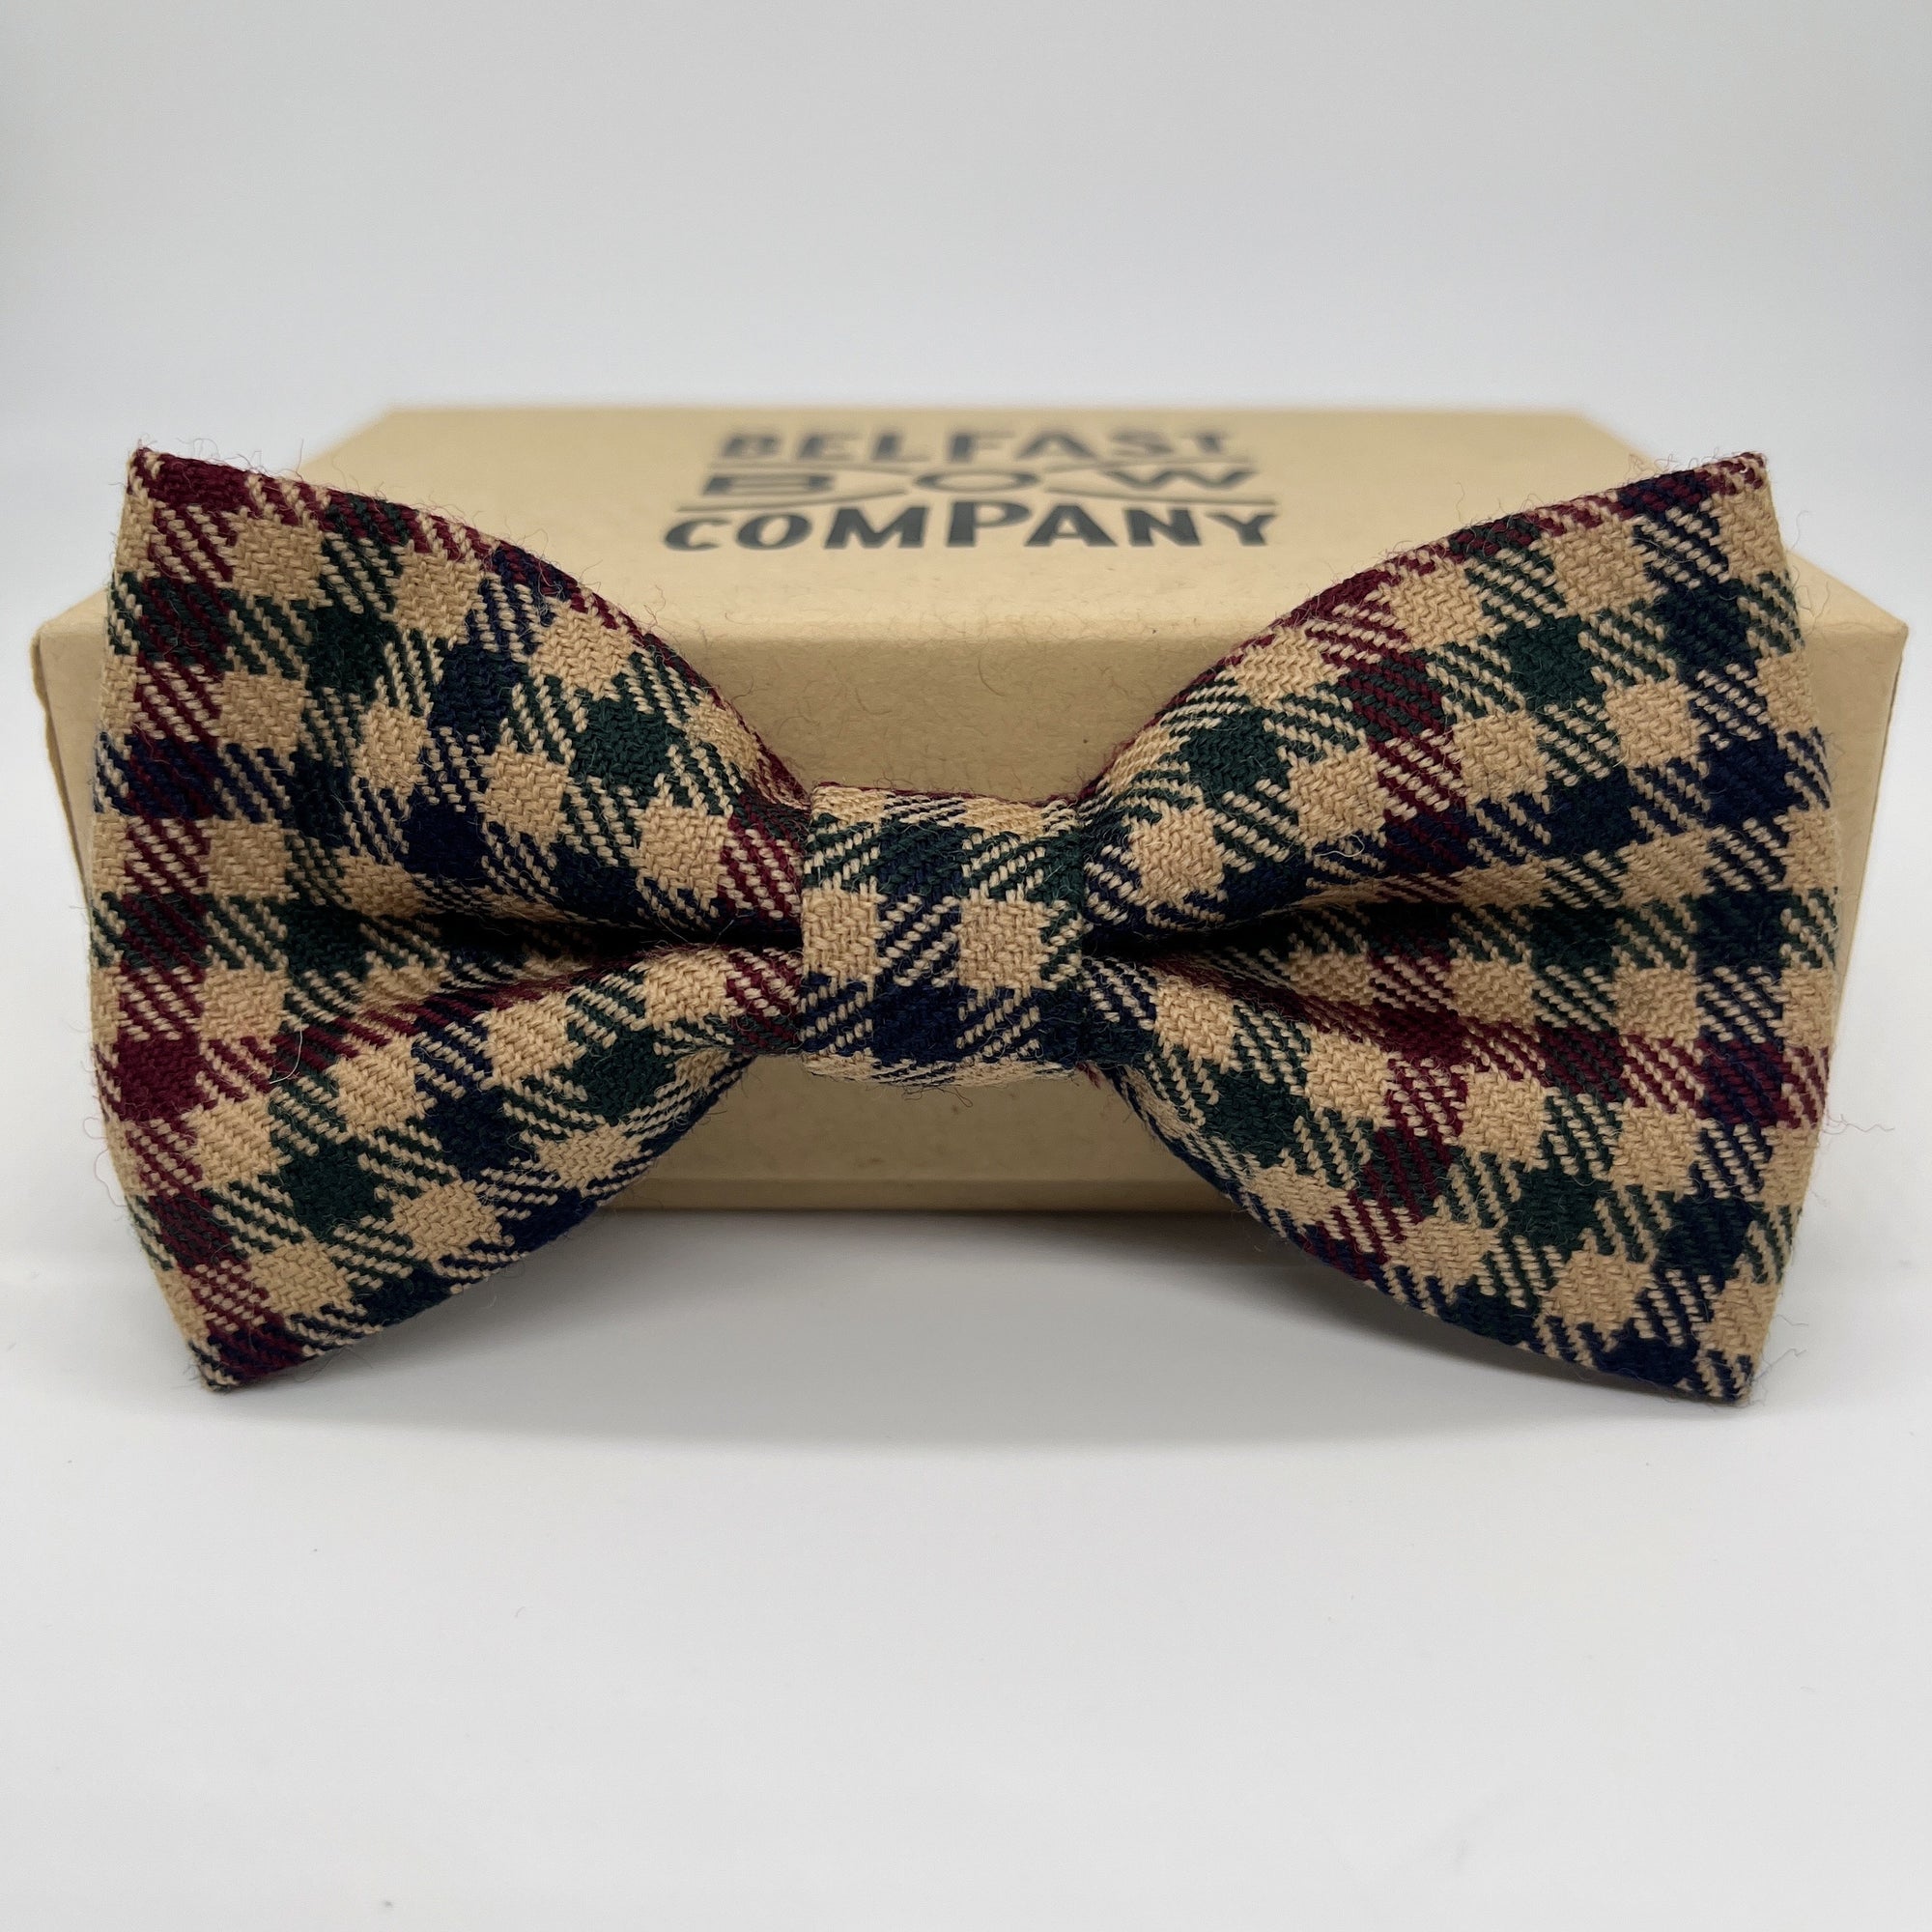 Checked Bow Tie in Burgundy, Navy & Green by the Belfast Bow Company